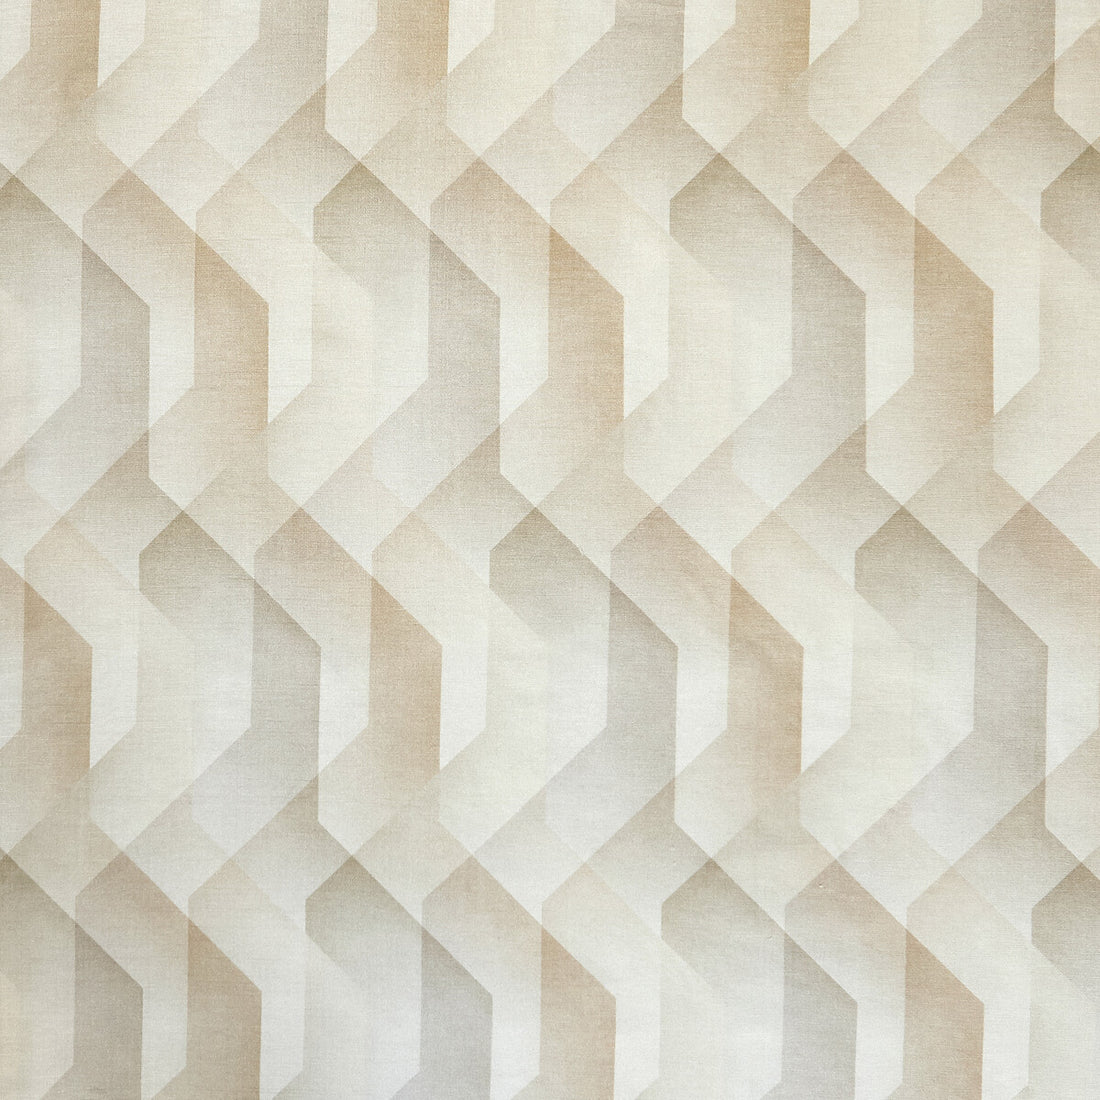 Palladino fabric in 6 color - pattern LZ-30212.06.0 - by Kravet Design in the Lizzo collection